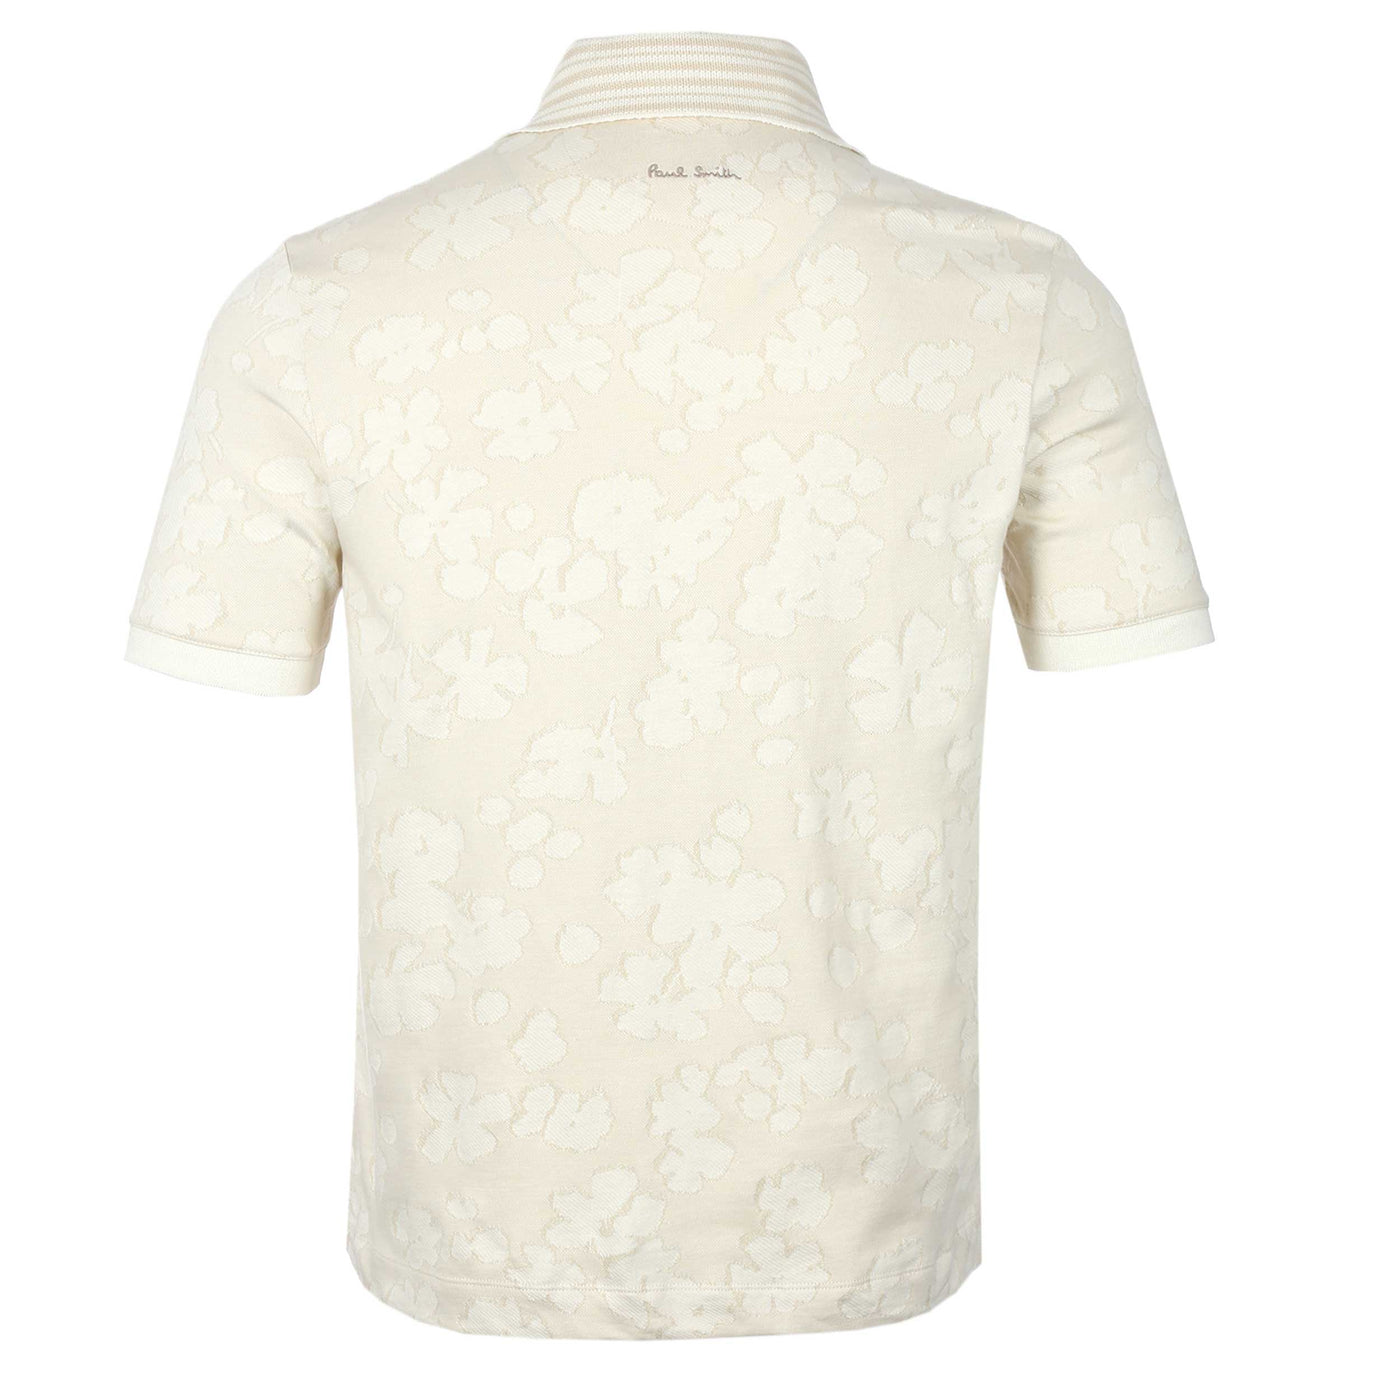 Paul Smith Floral Jacquard Polo Shirt in Cream Back